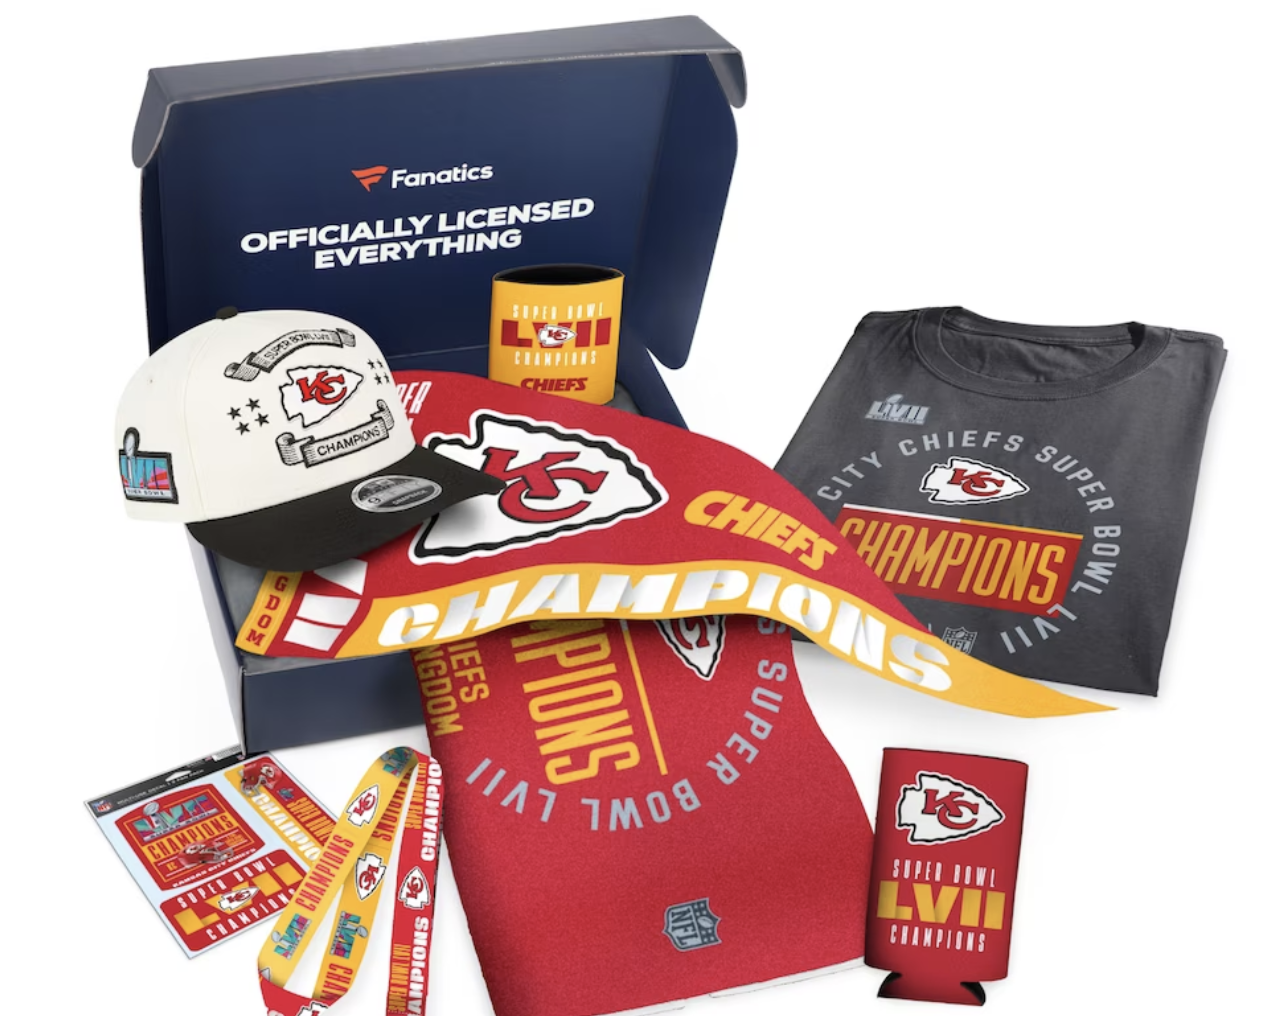 Chiefs are Super Bowl champions! Celebrate with new merchandise